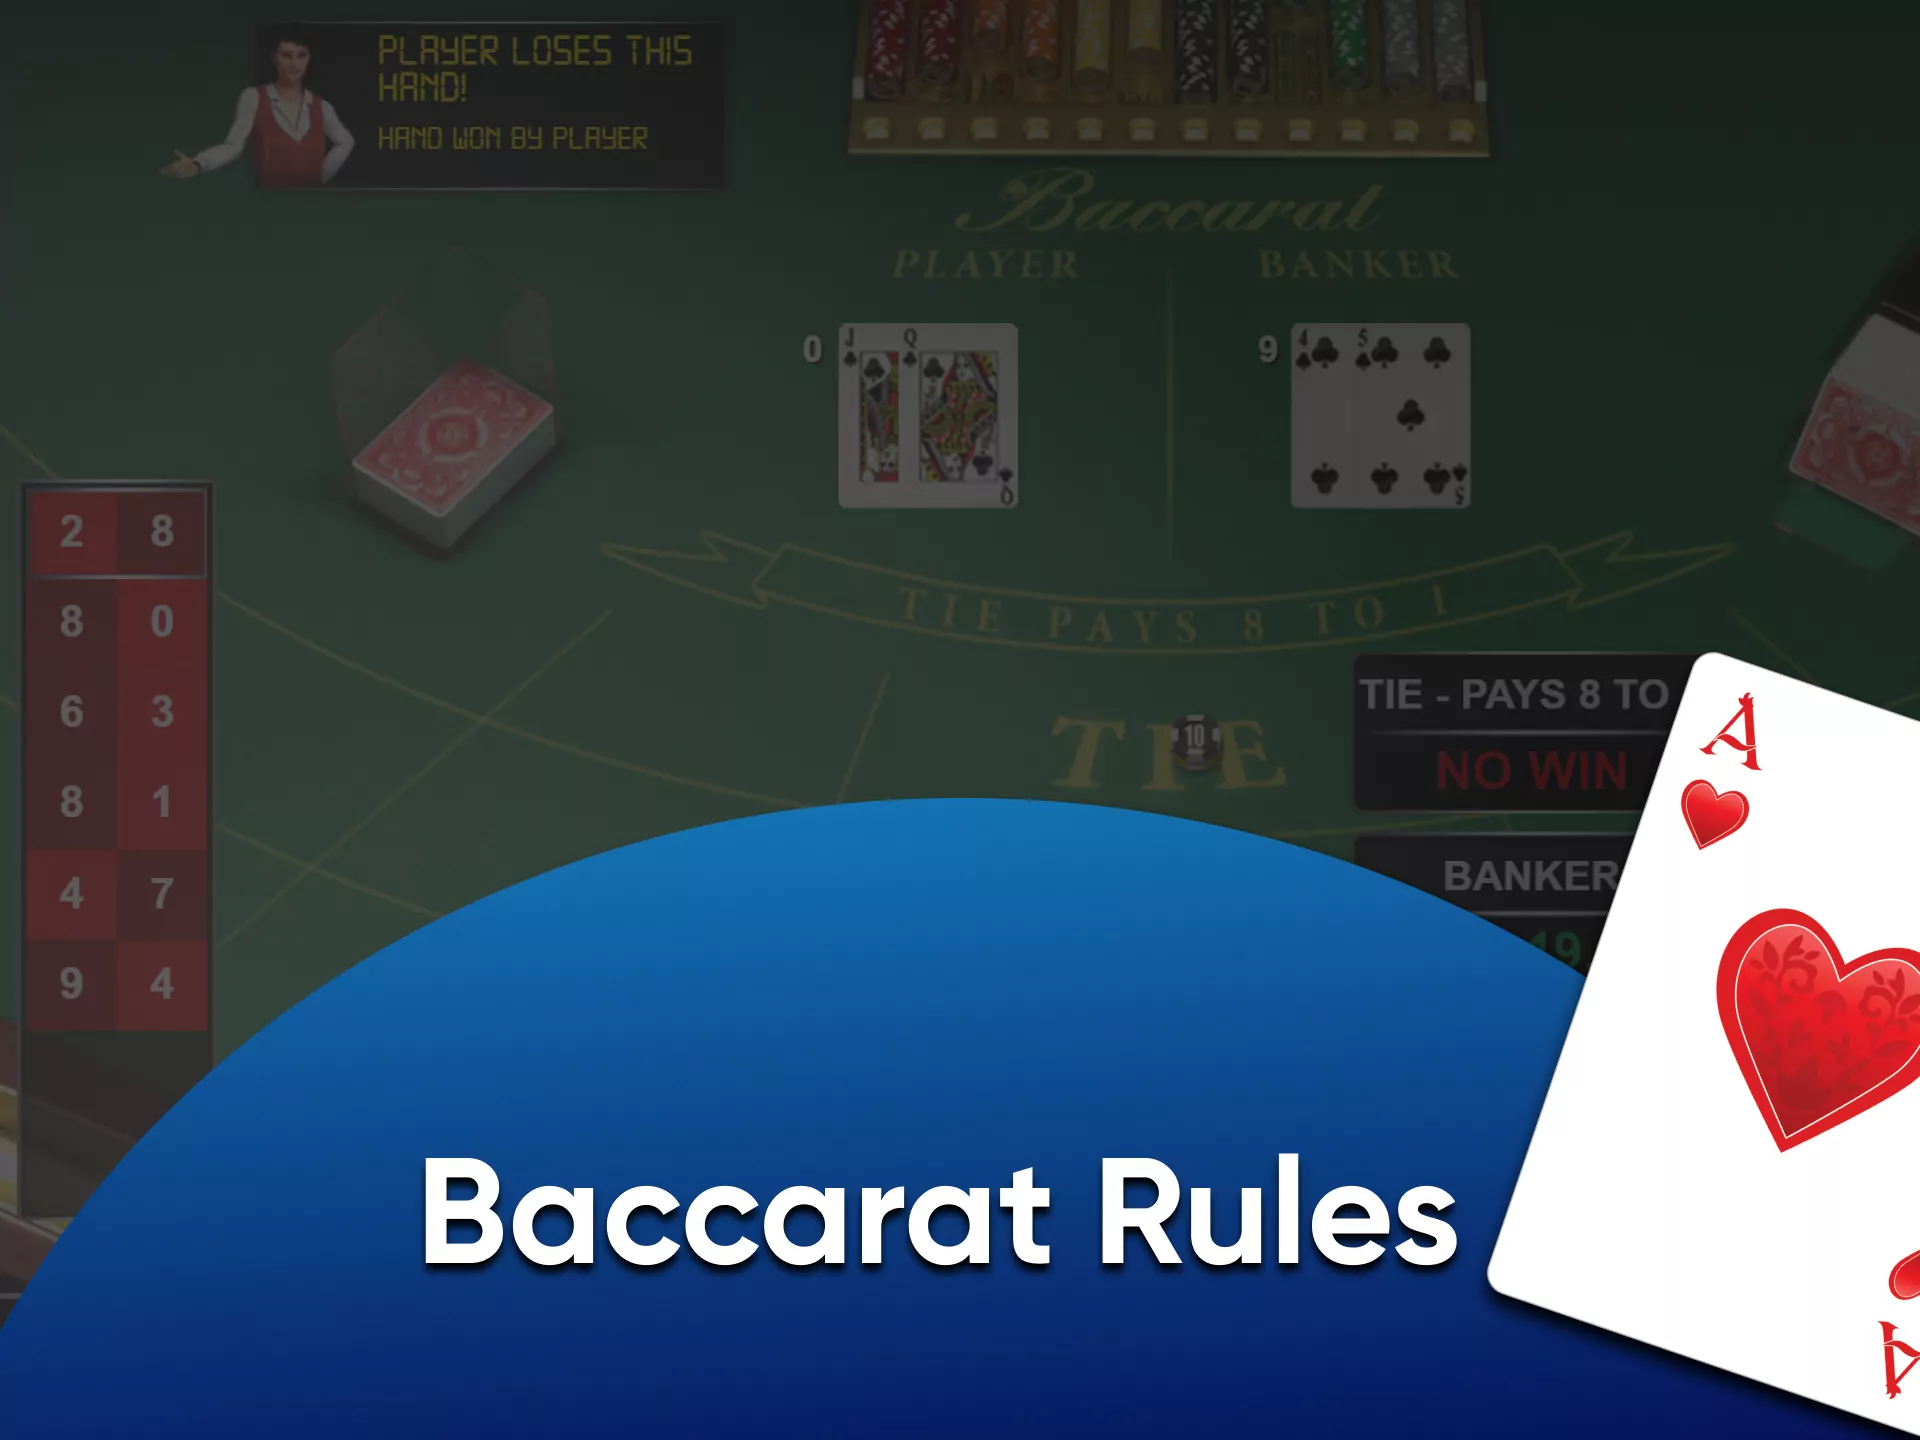 Learn the rules before playing Baccarat.